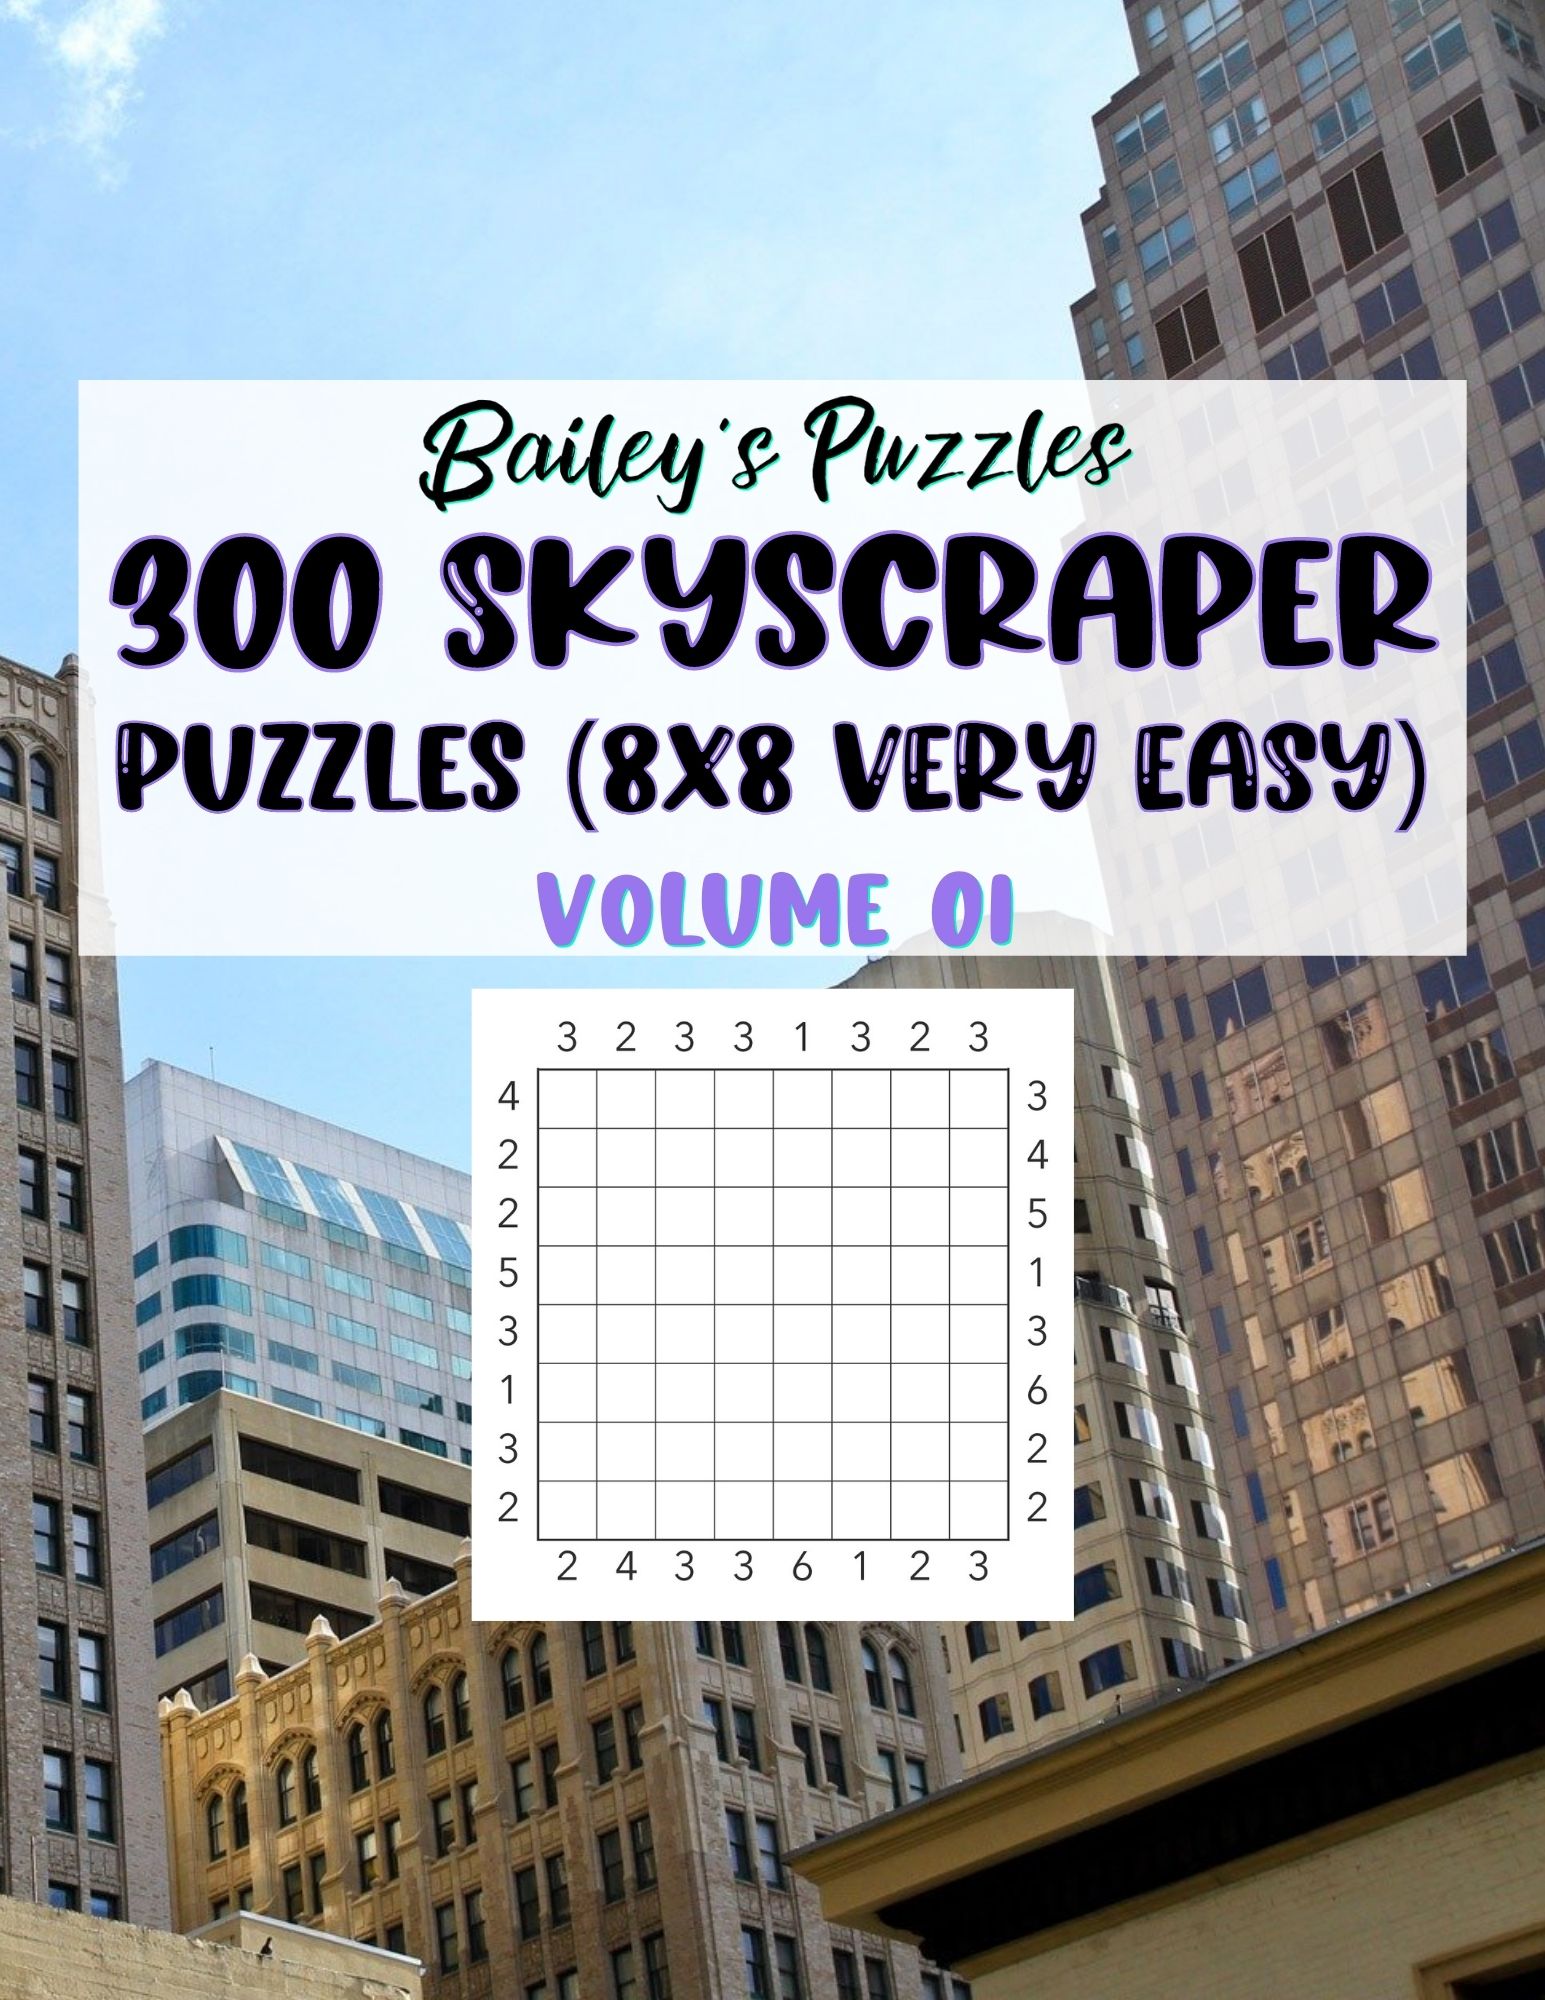 Front Cover - 450 Skyscraper Puzzles (8x8, very easy)